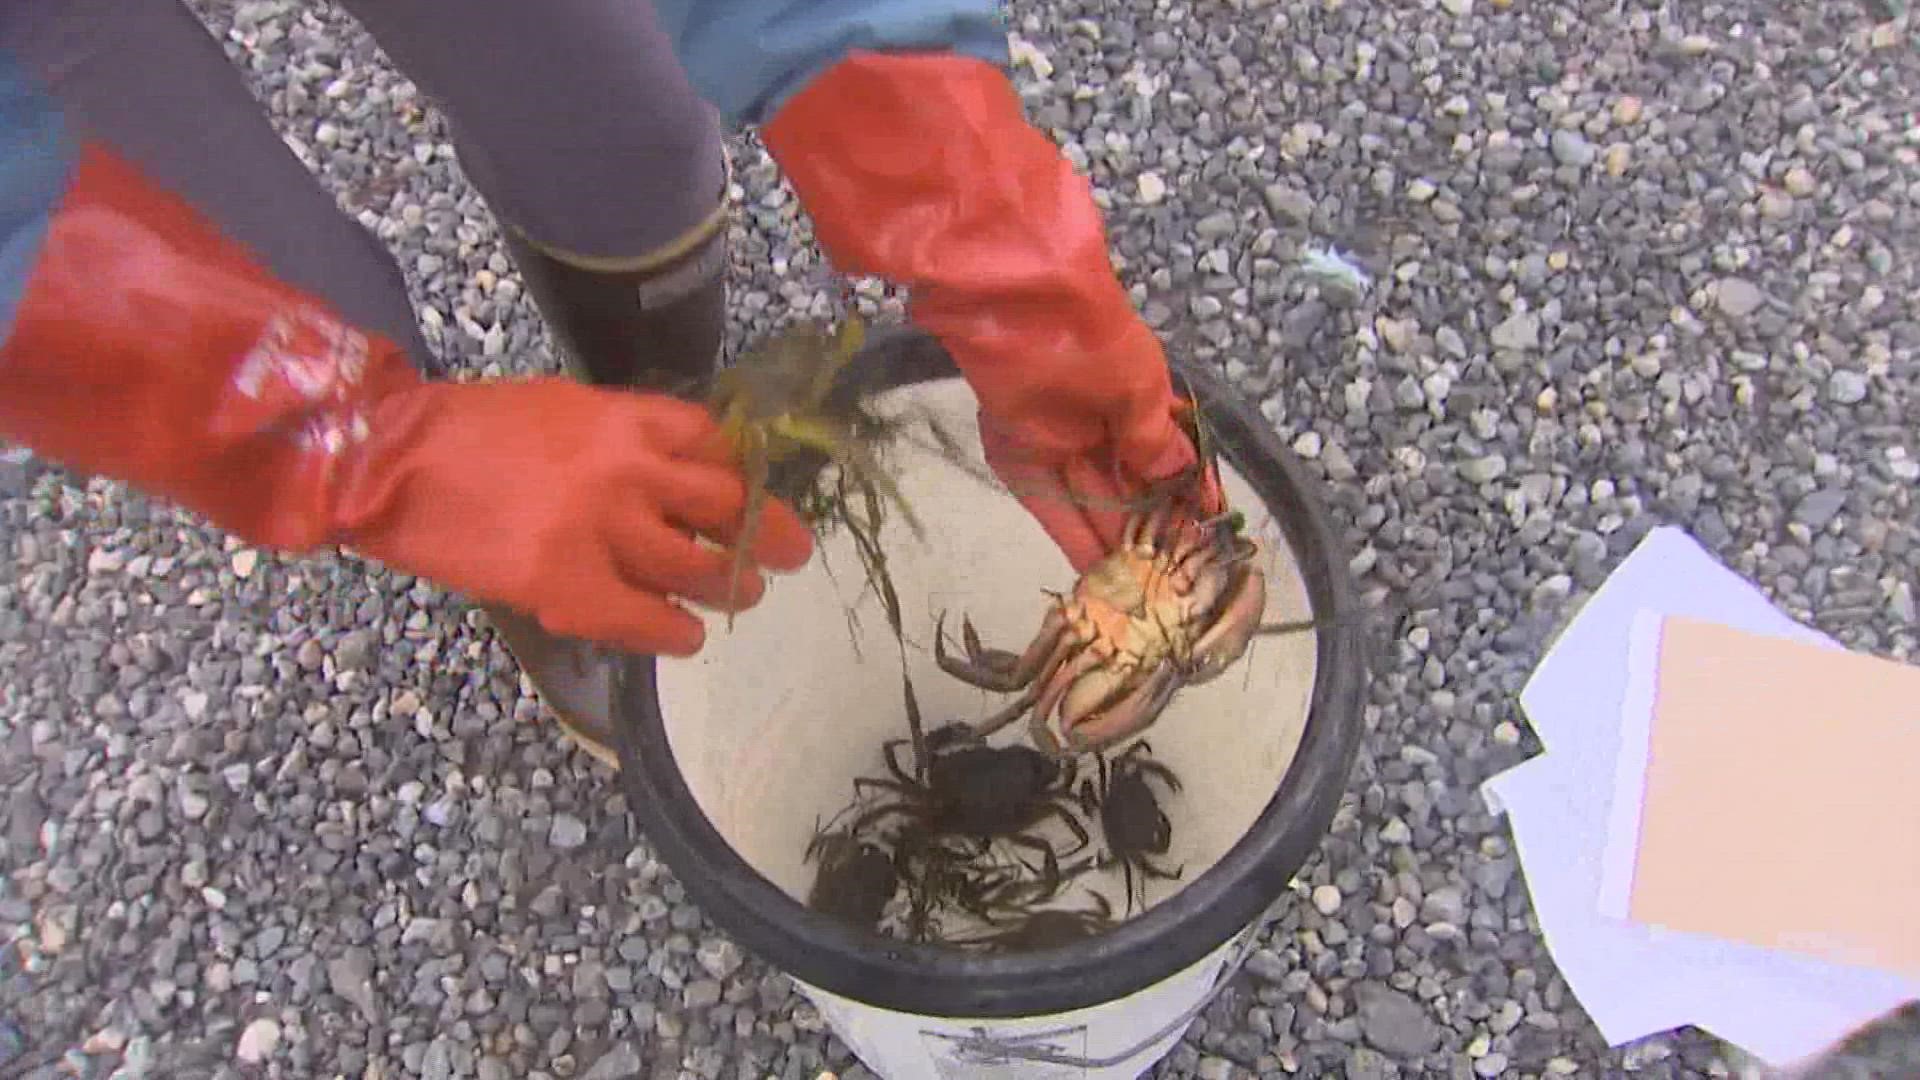 Lummi Nation Chairman William Jones Jr. said the appearance of the European green crab is a serious threat to their treaty fishing rights.